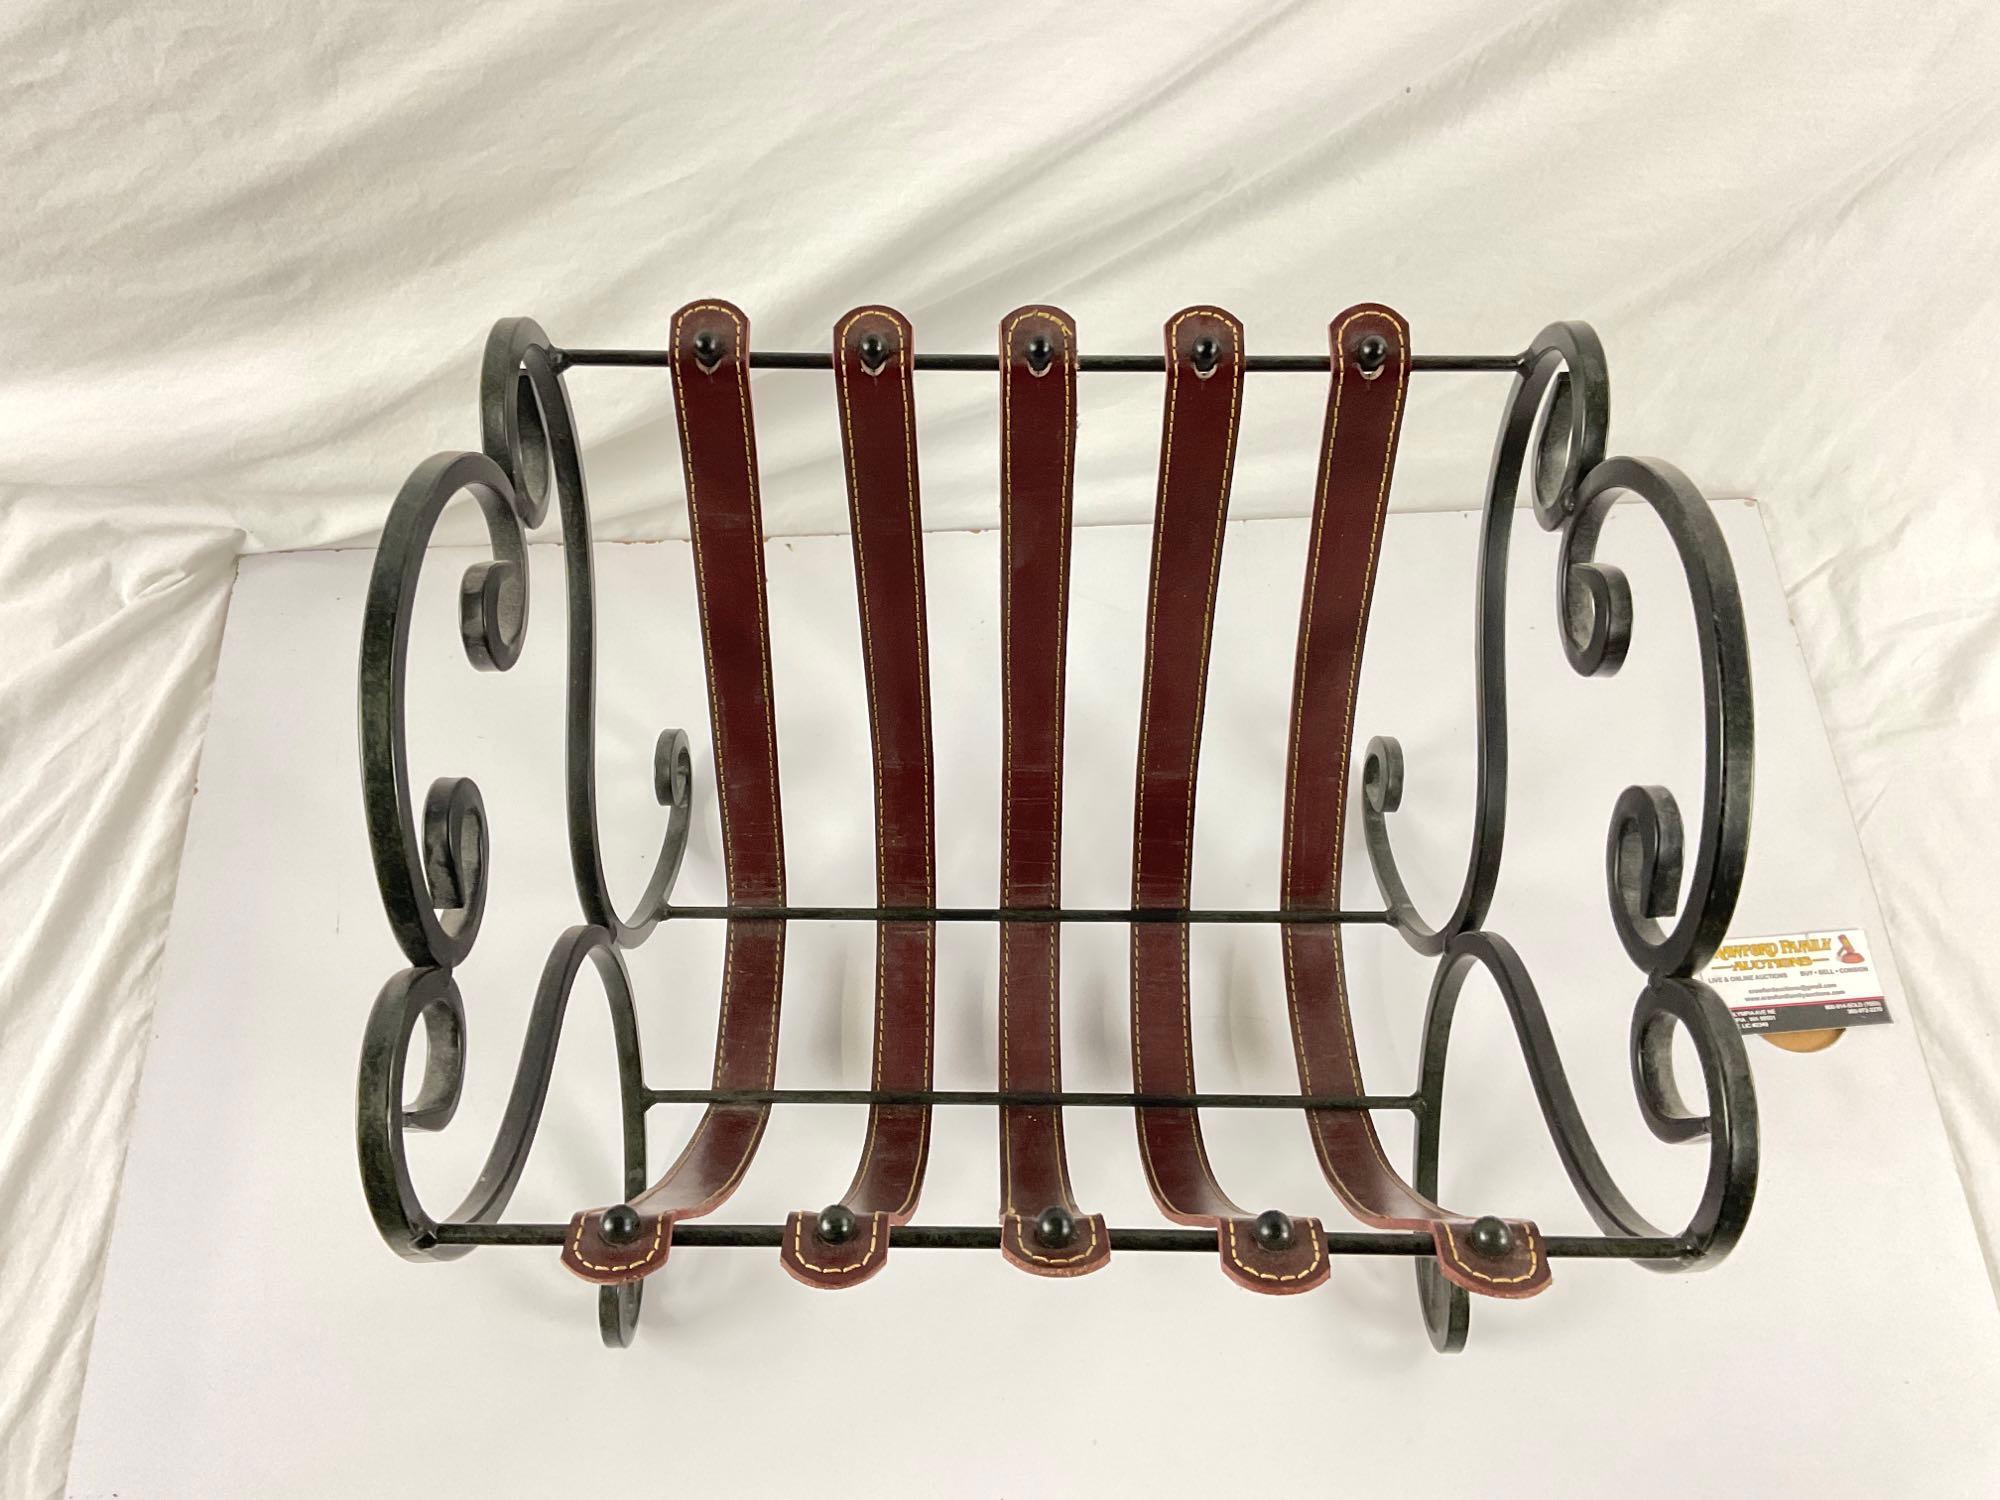 Vintage Black Wrought Iron and Brown Leather Straps Magazine Rack/Holder